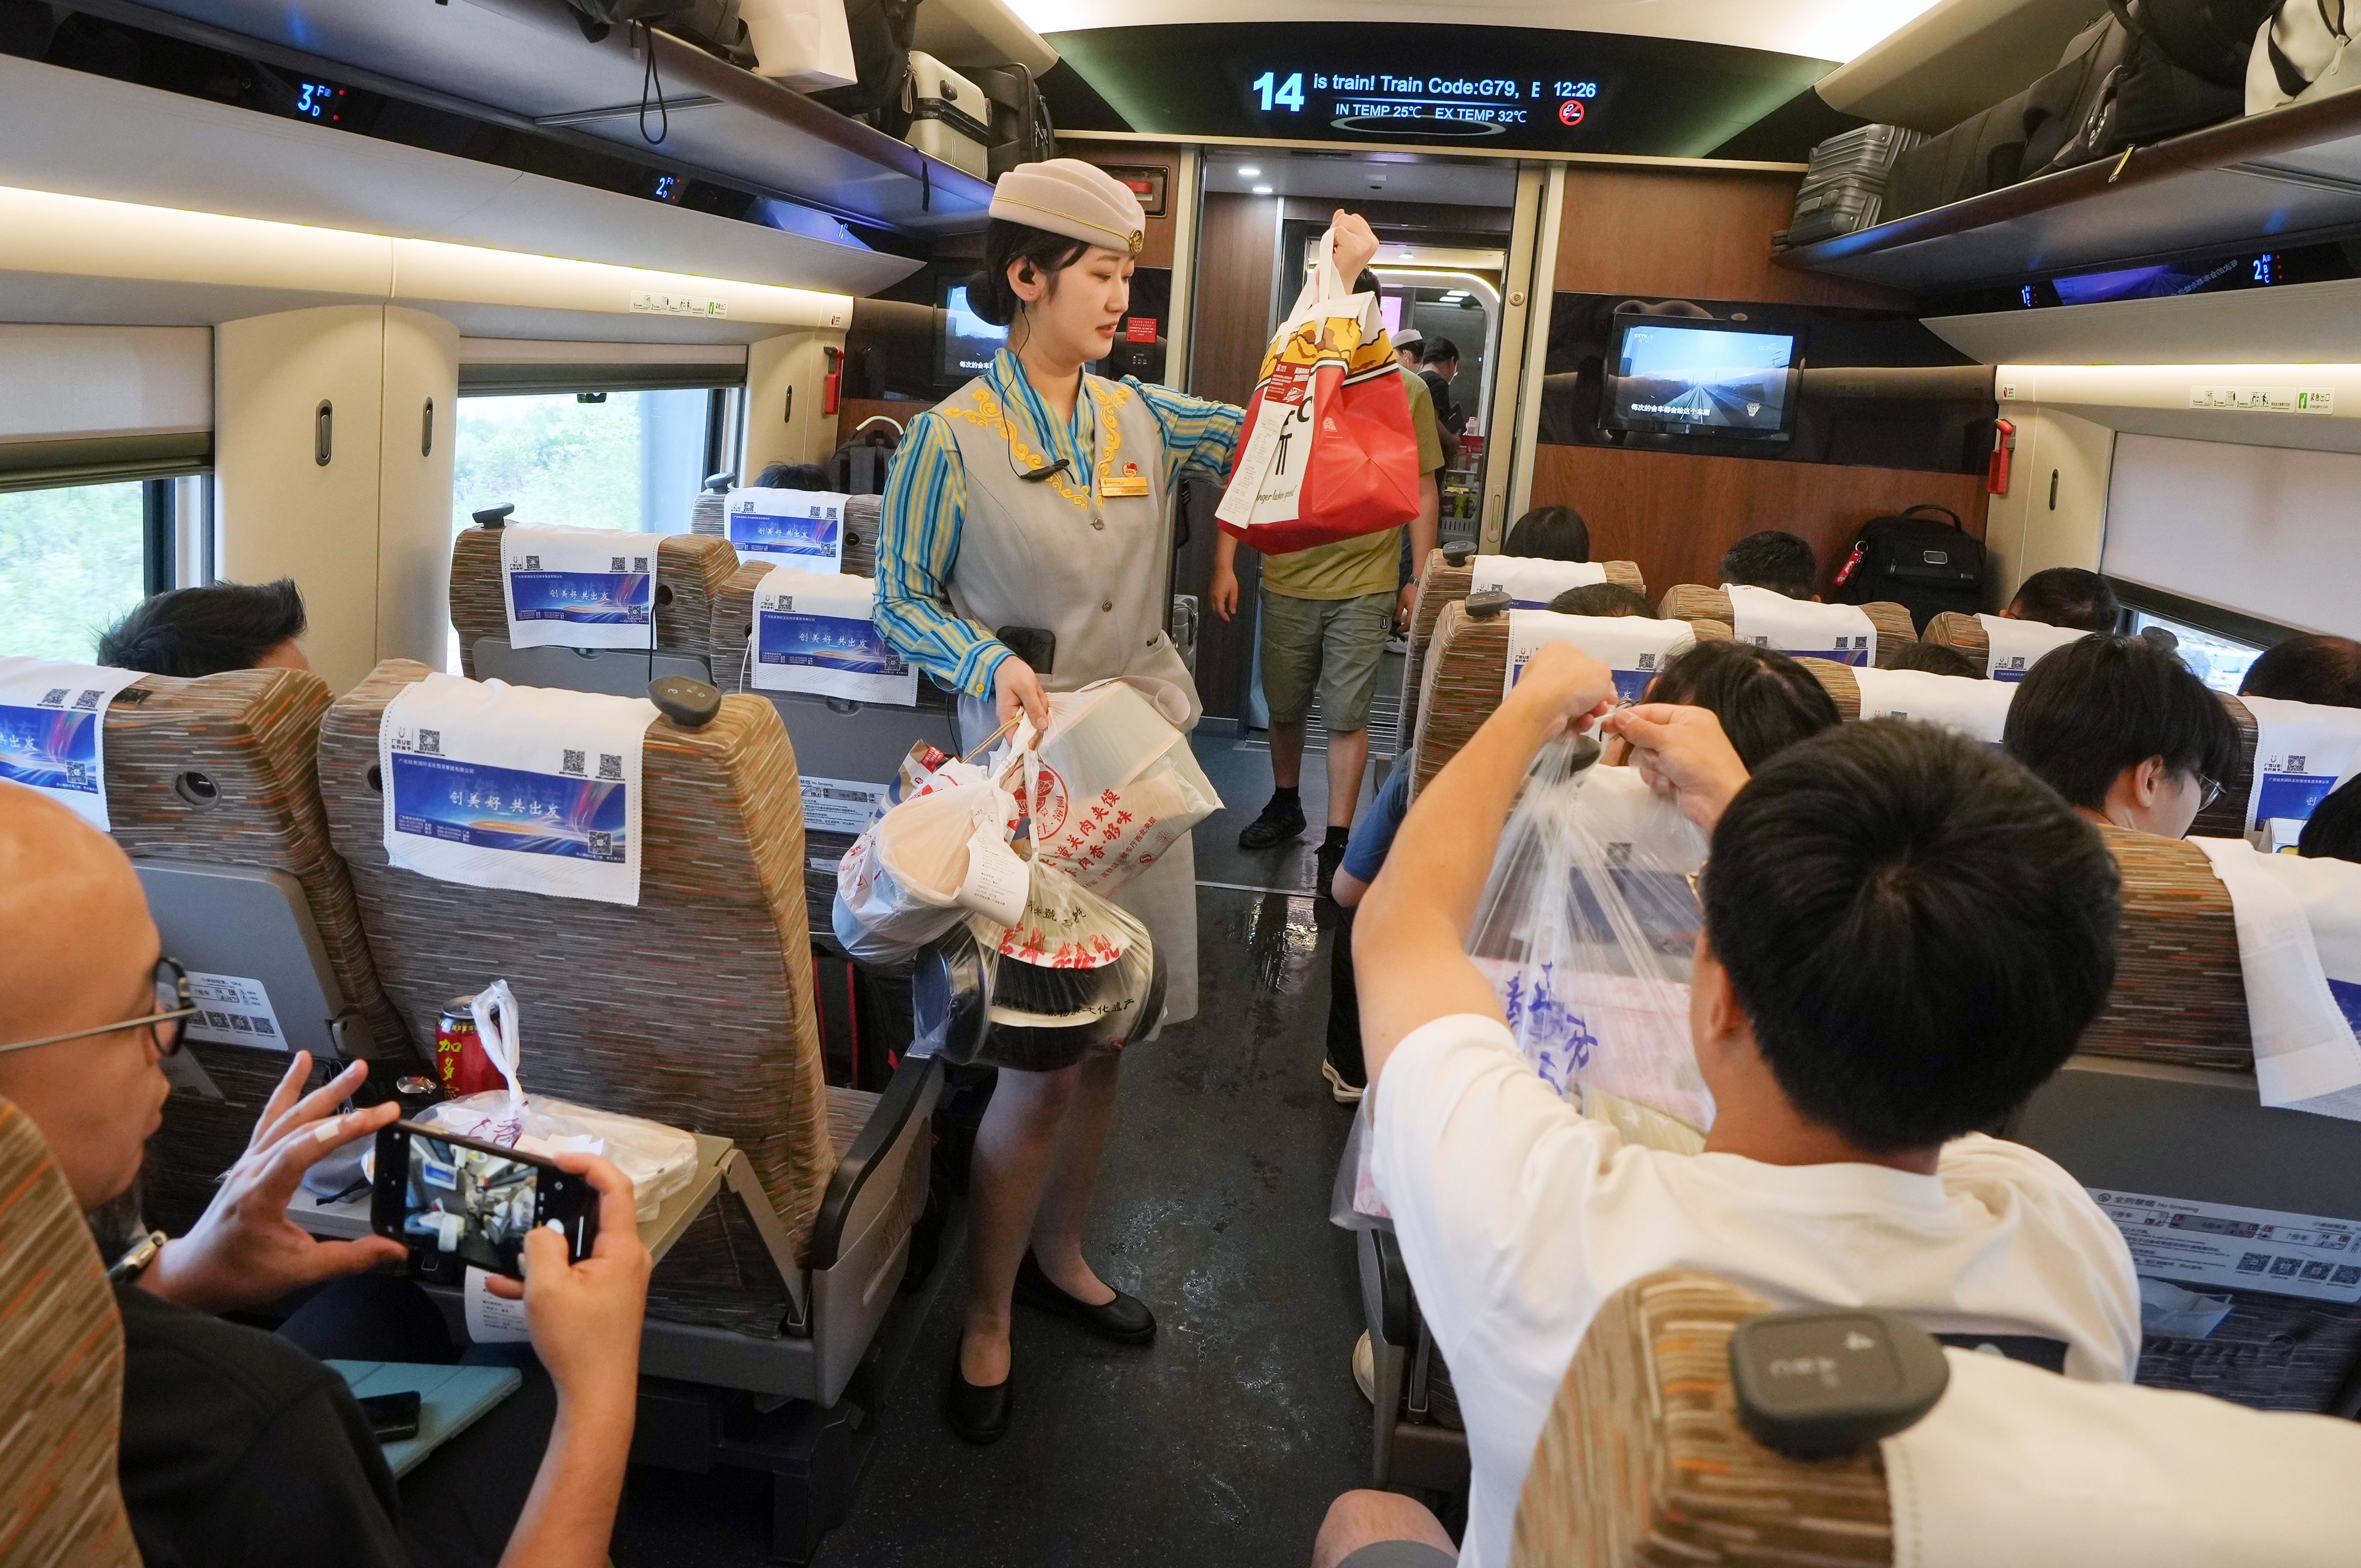 Train crew on an all-seater high-speed train help hand out food deliveries to passengers. Photo: Elson Li